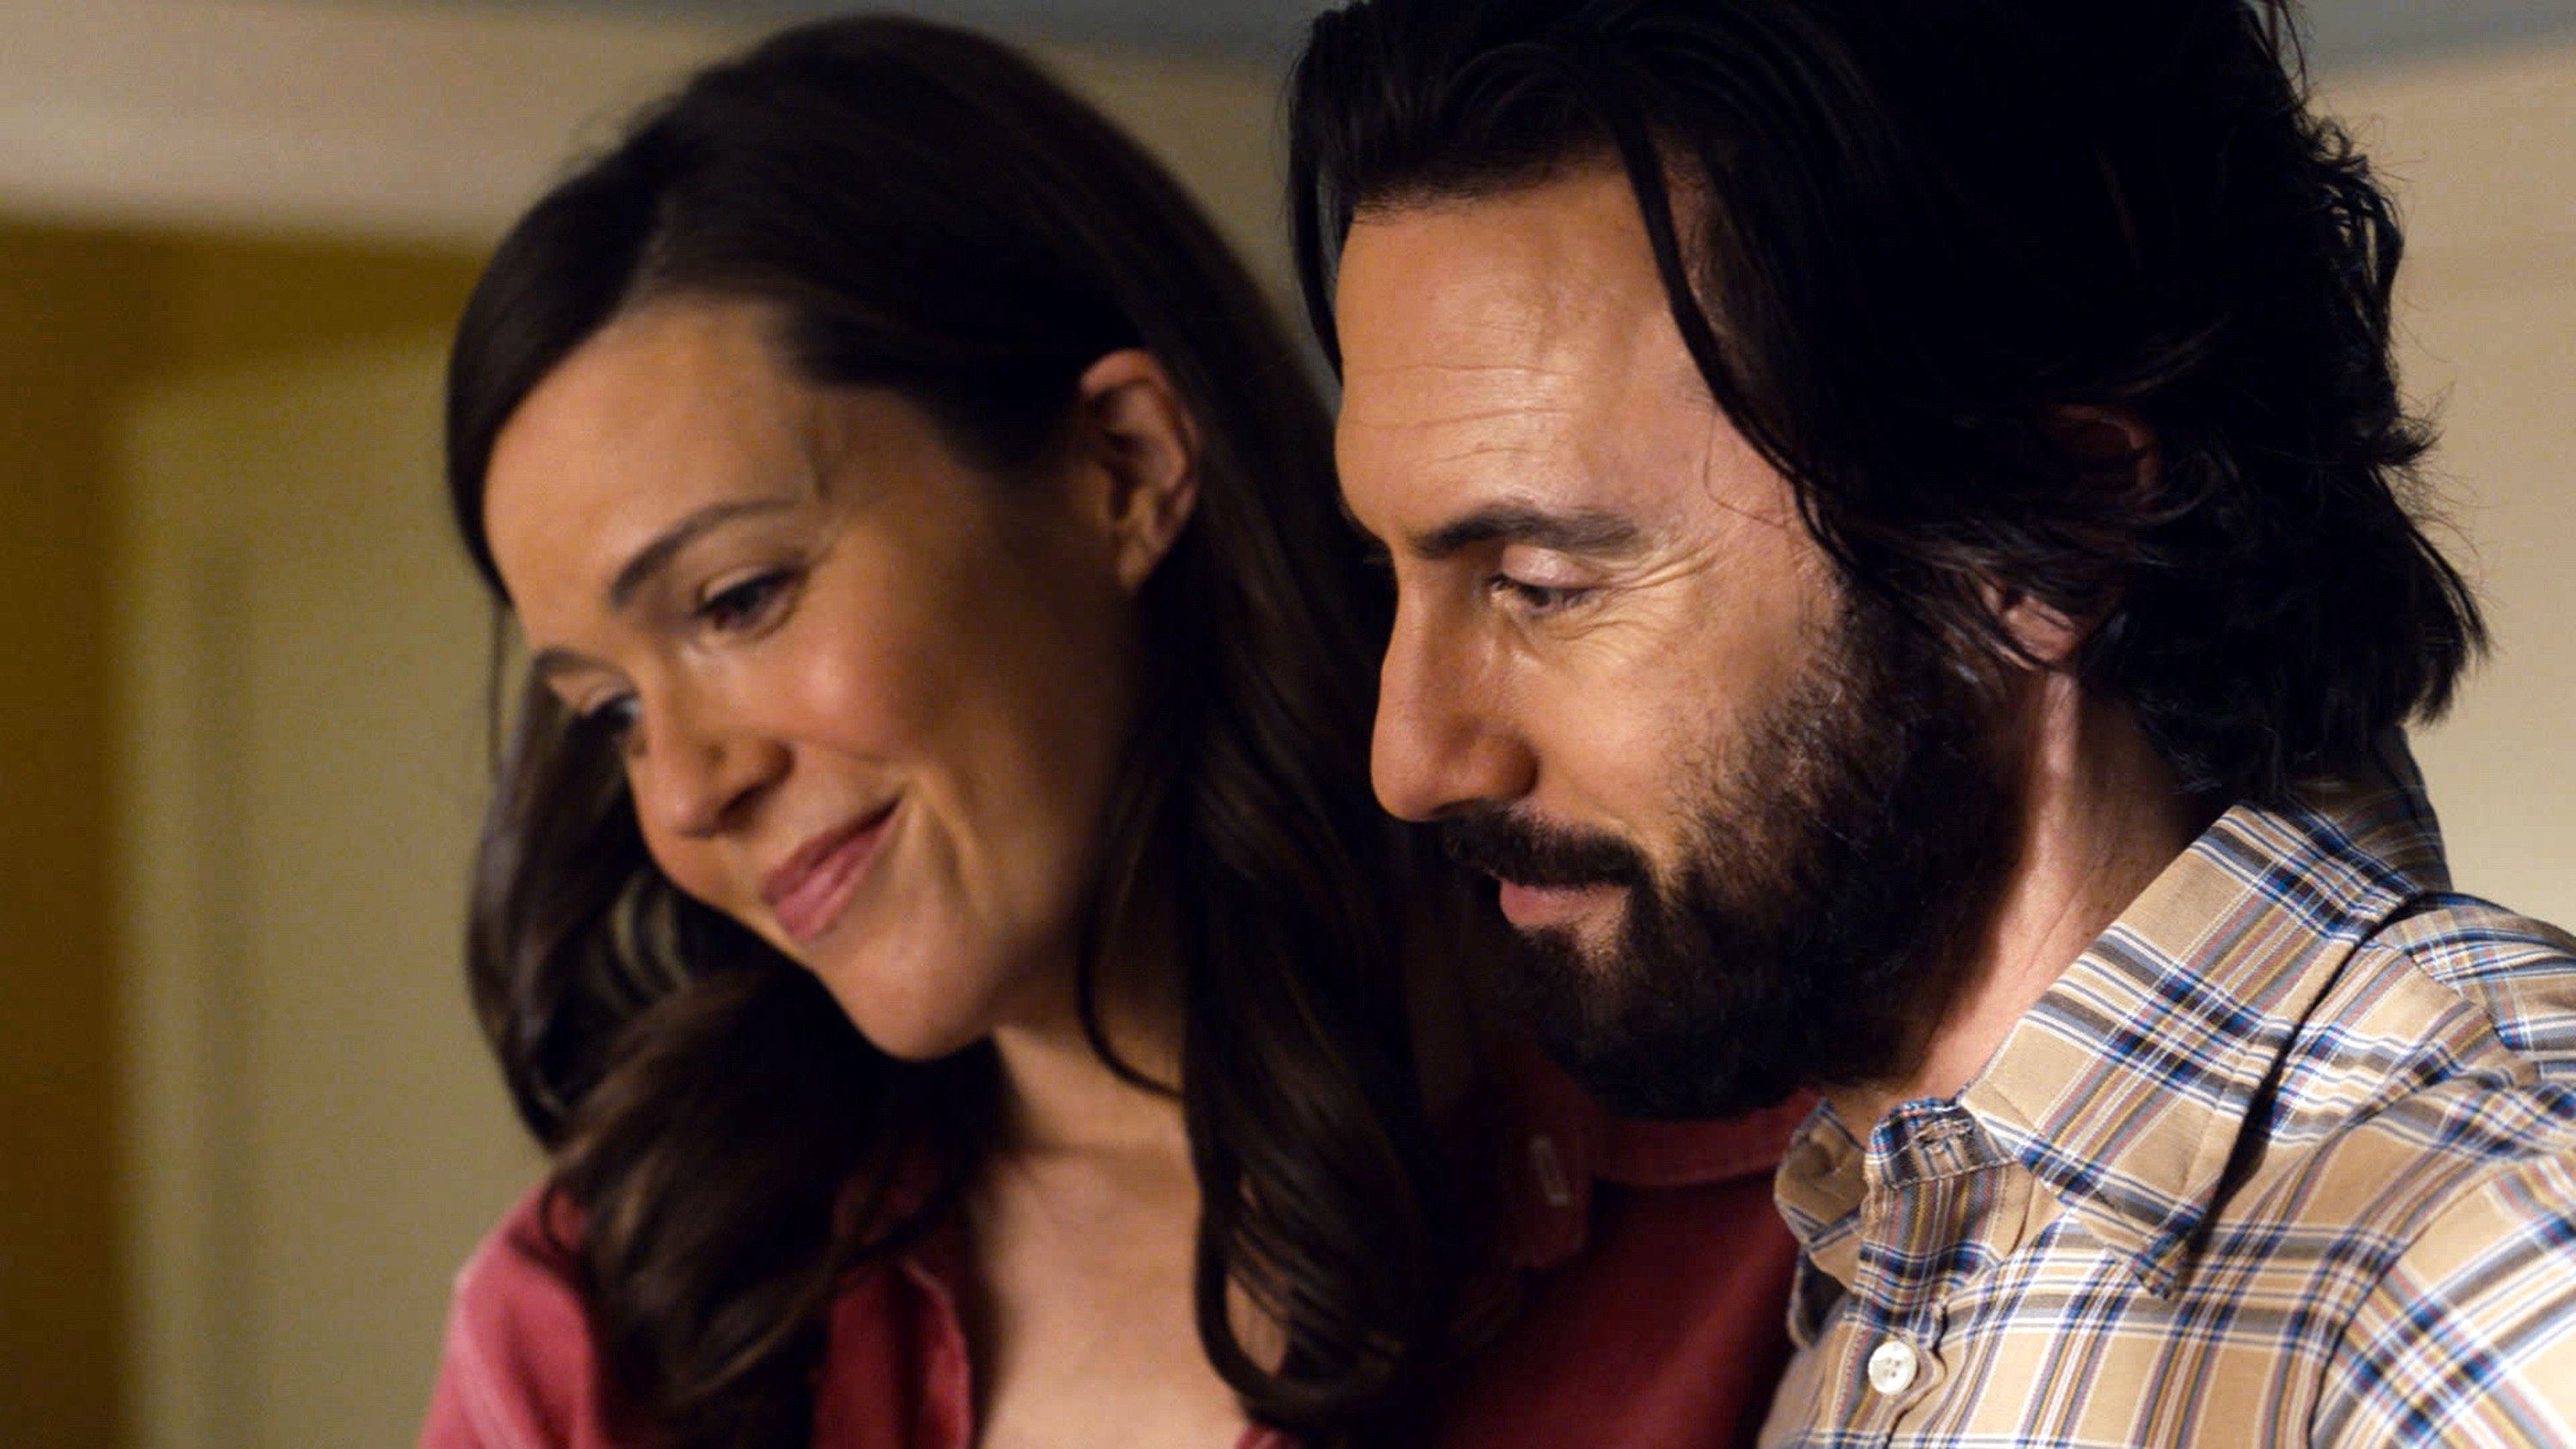 'This Is Us' Season 6 stars Mandy Moore and Milo Ventimiglia, who will appear in the trailer, are in character as Rebecca and Jack Pearson. Moore wears a pink shirt. Ventimiglia wears a light brown and blue plaid shirt.